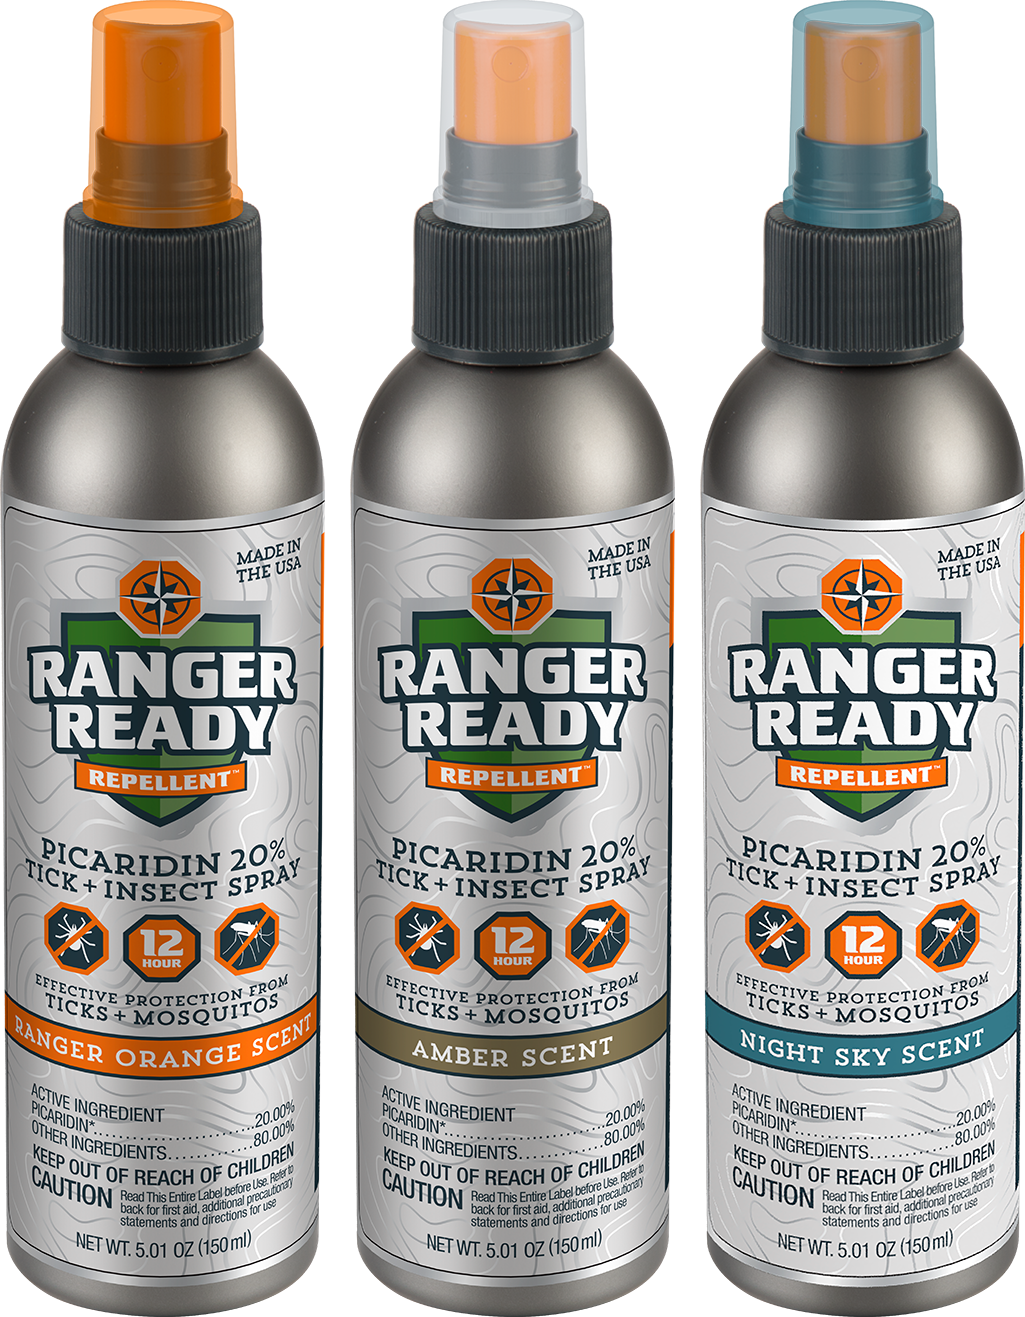 Ranger Ready Repellents Launch DEET-Free Insect Repellents